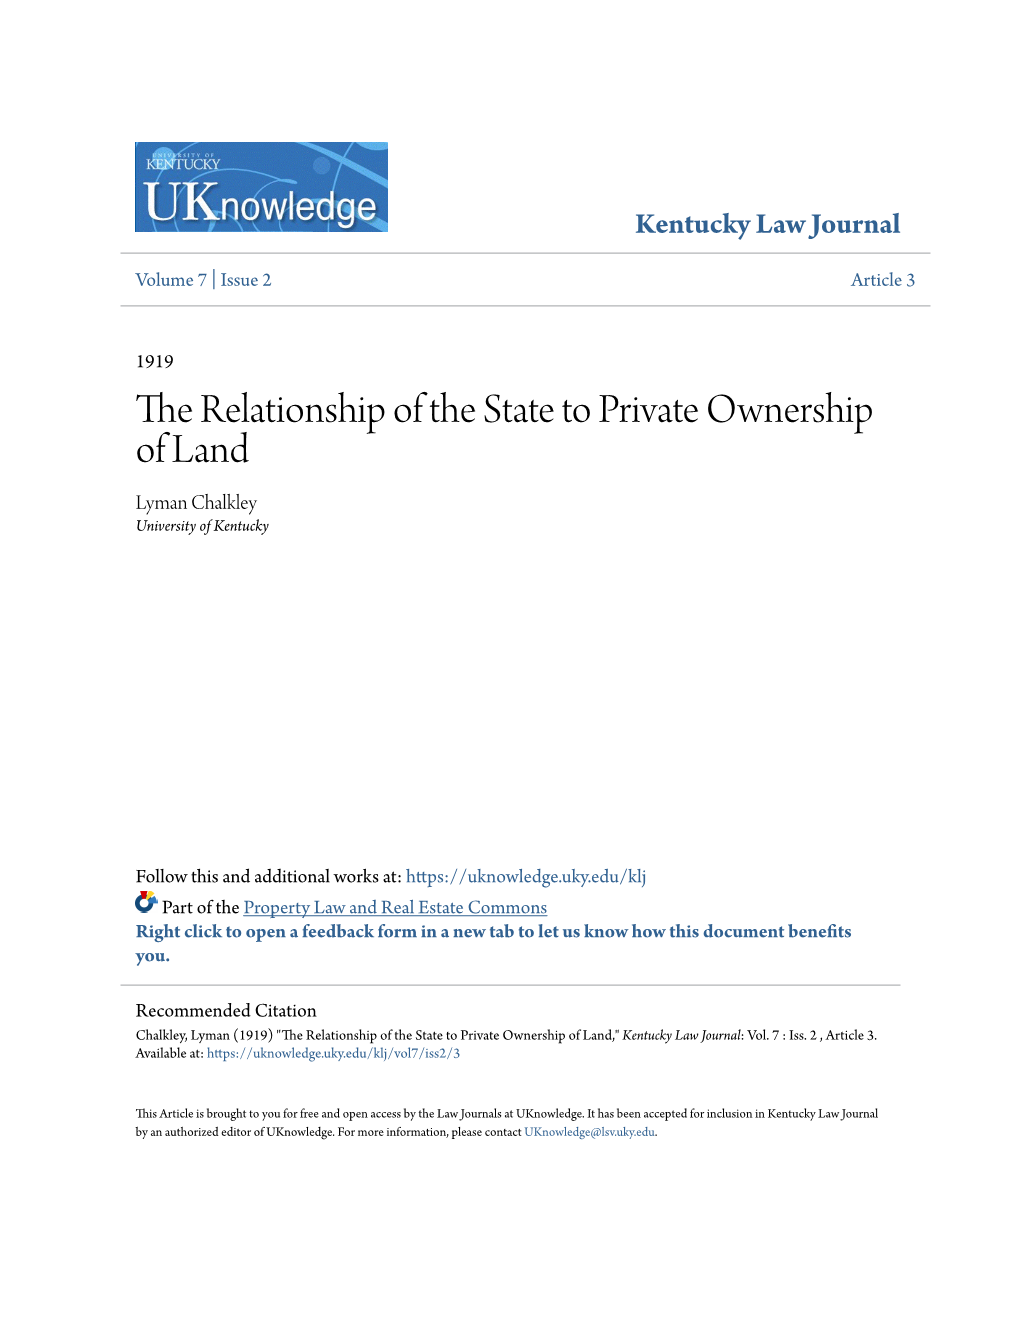 The Relationship of the State to Private Ownership of Land Lyman Chalkley University of Kentucky